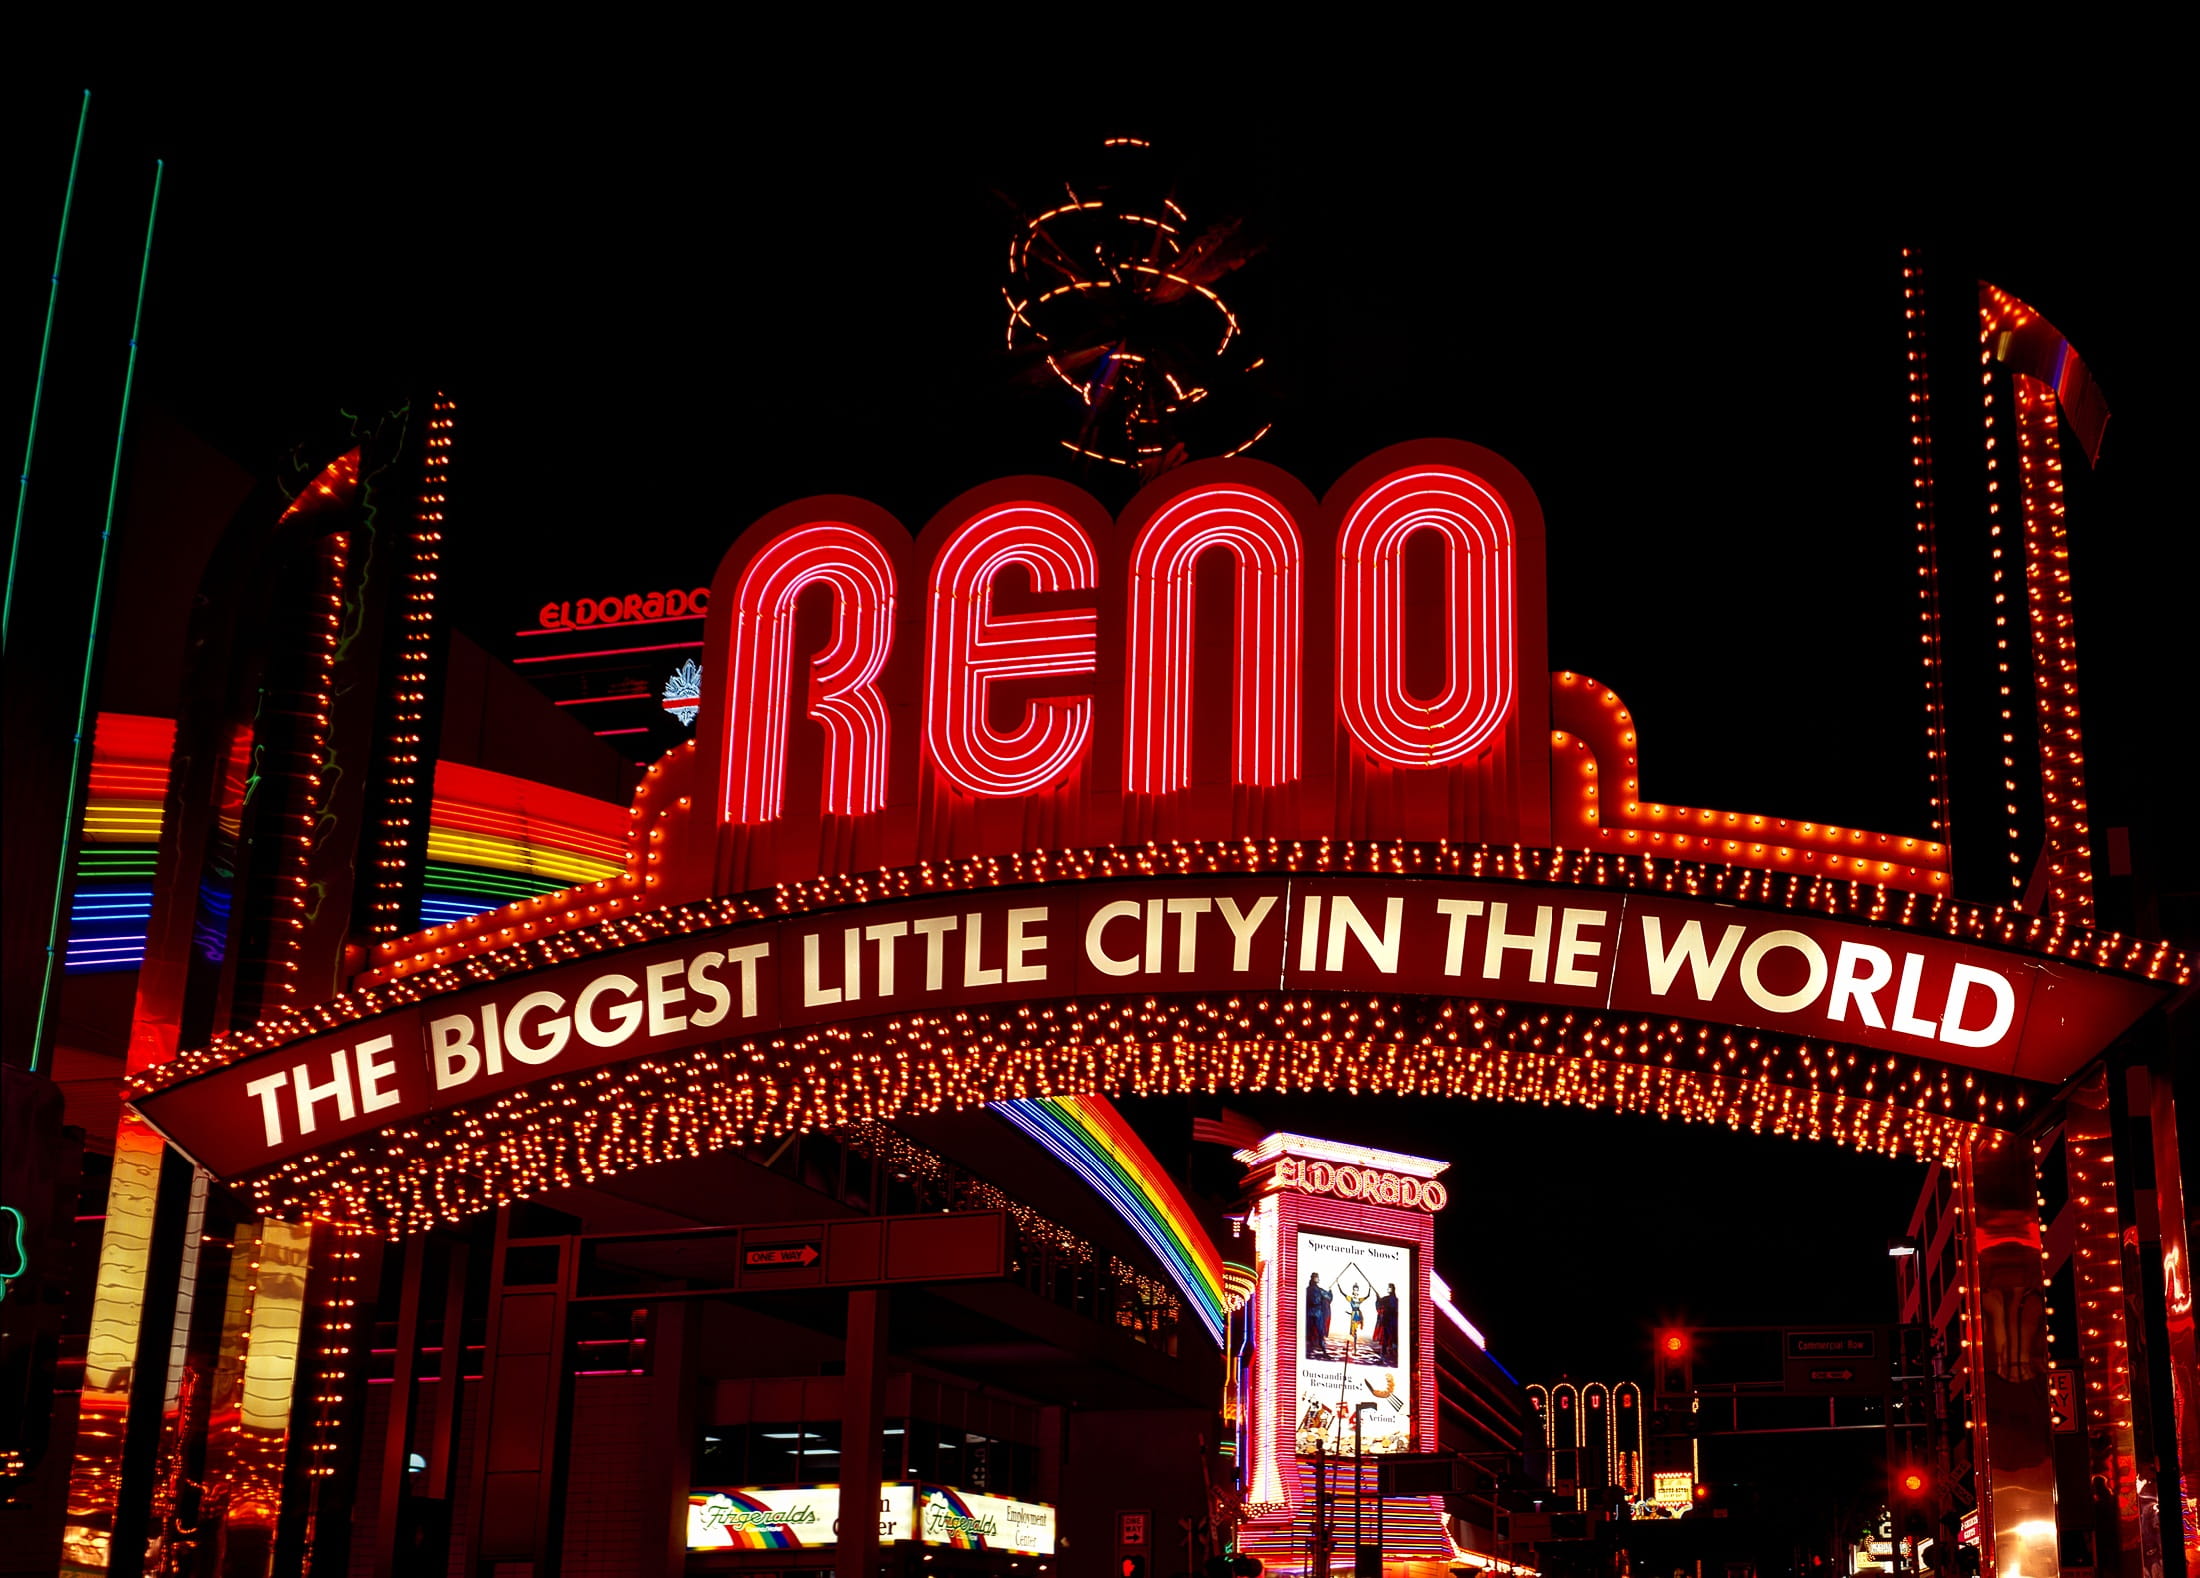 Reno The Biggest Little City In The World sign during night time